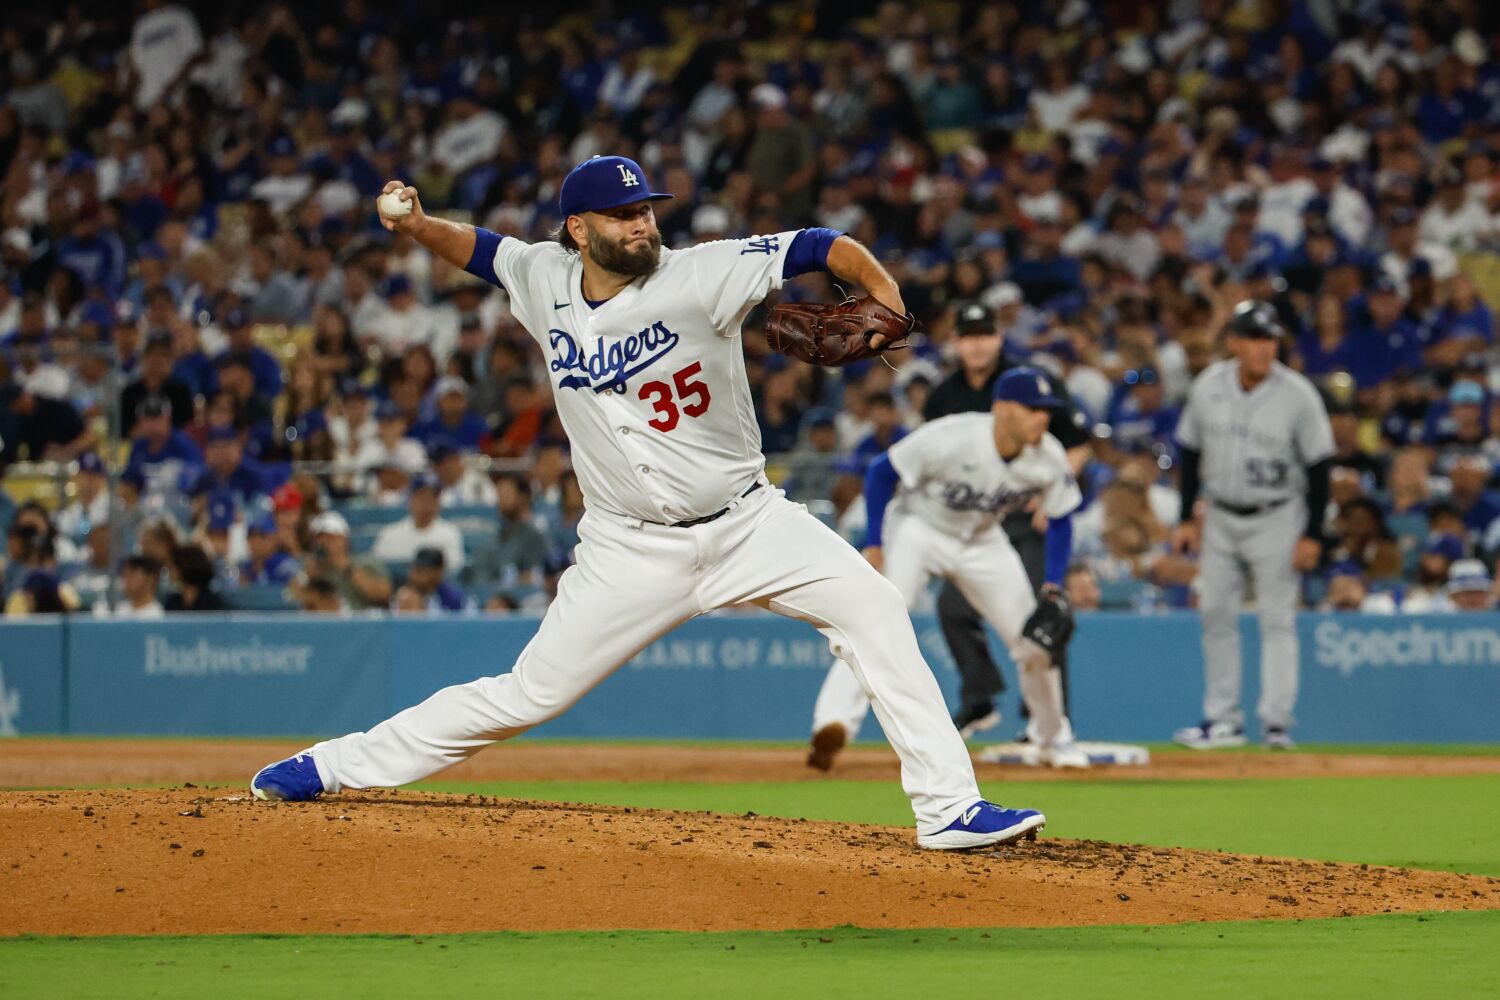 Lance Lynn continues his L.A. 'rebirth' as Dodgers pick up sixth consecutive win